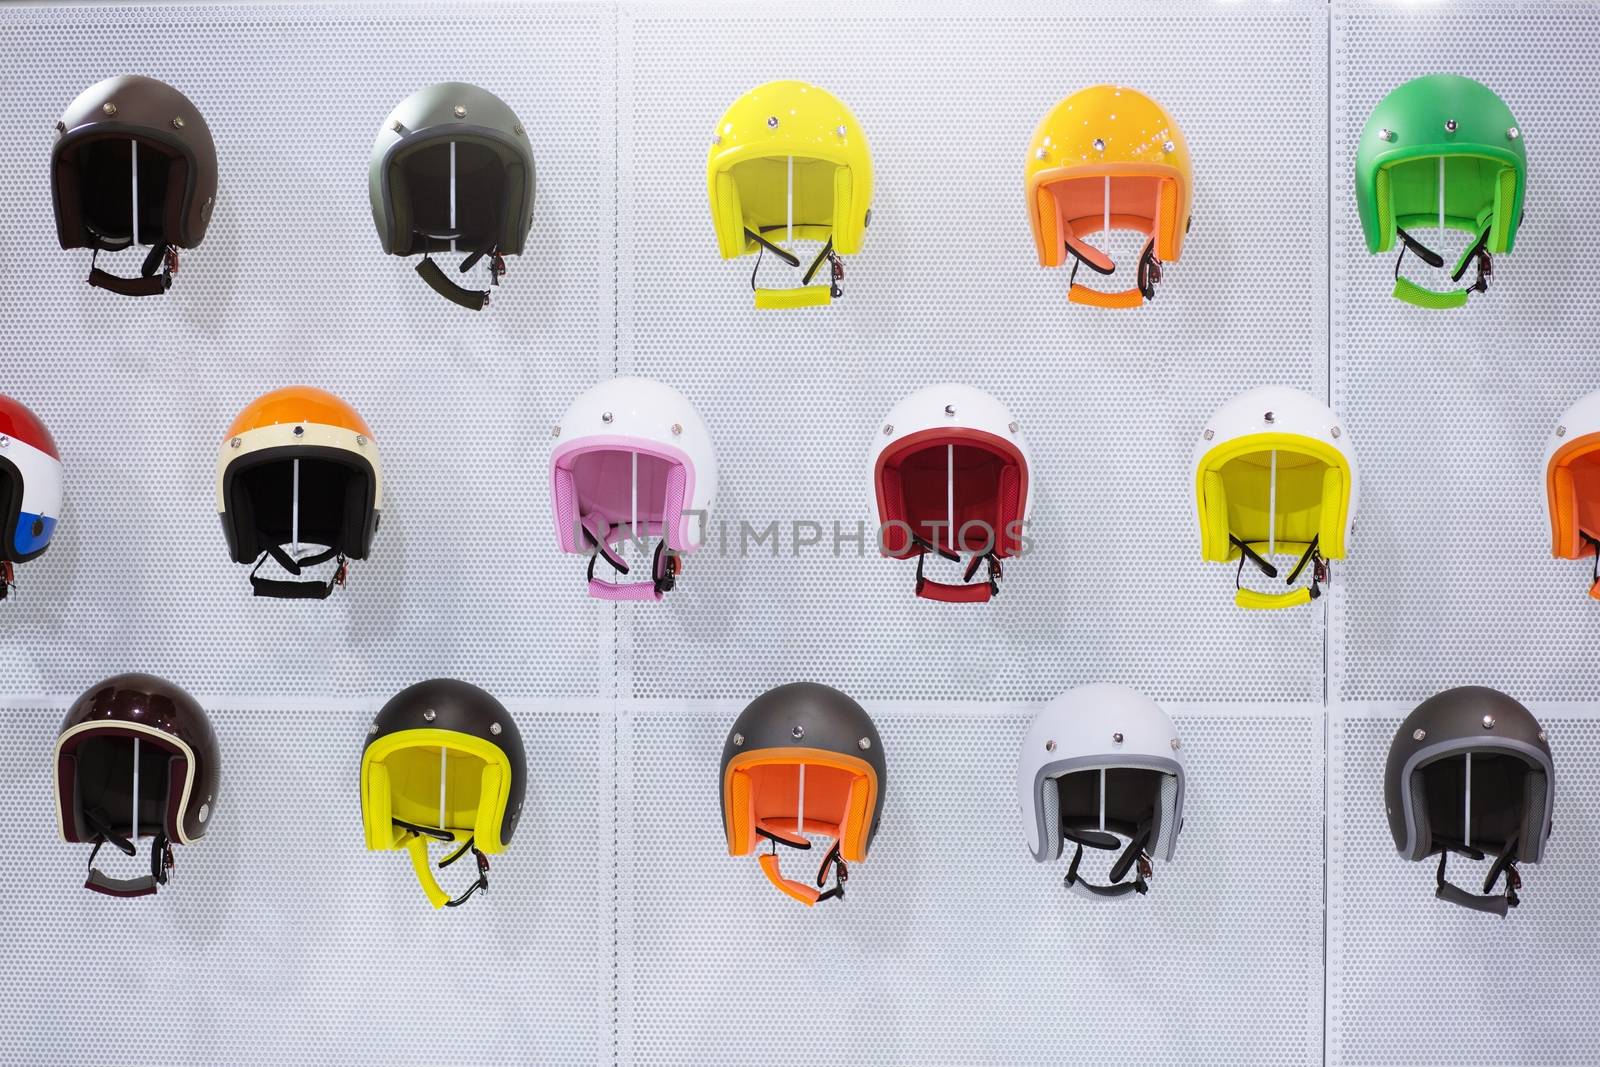 Motorcycle helmets are at the shop.